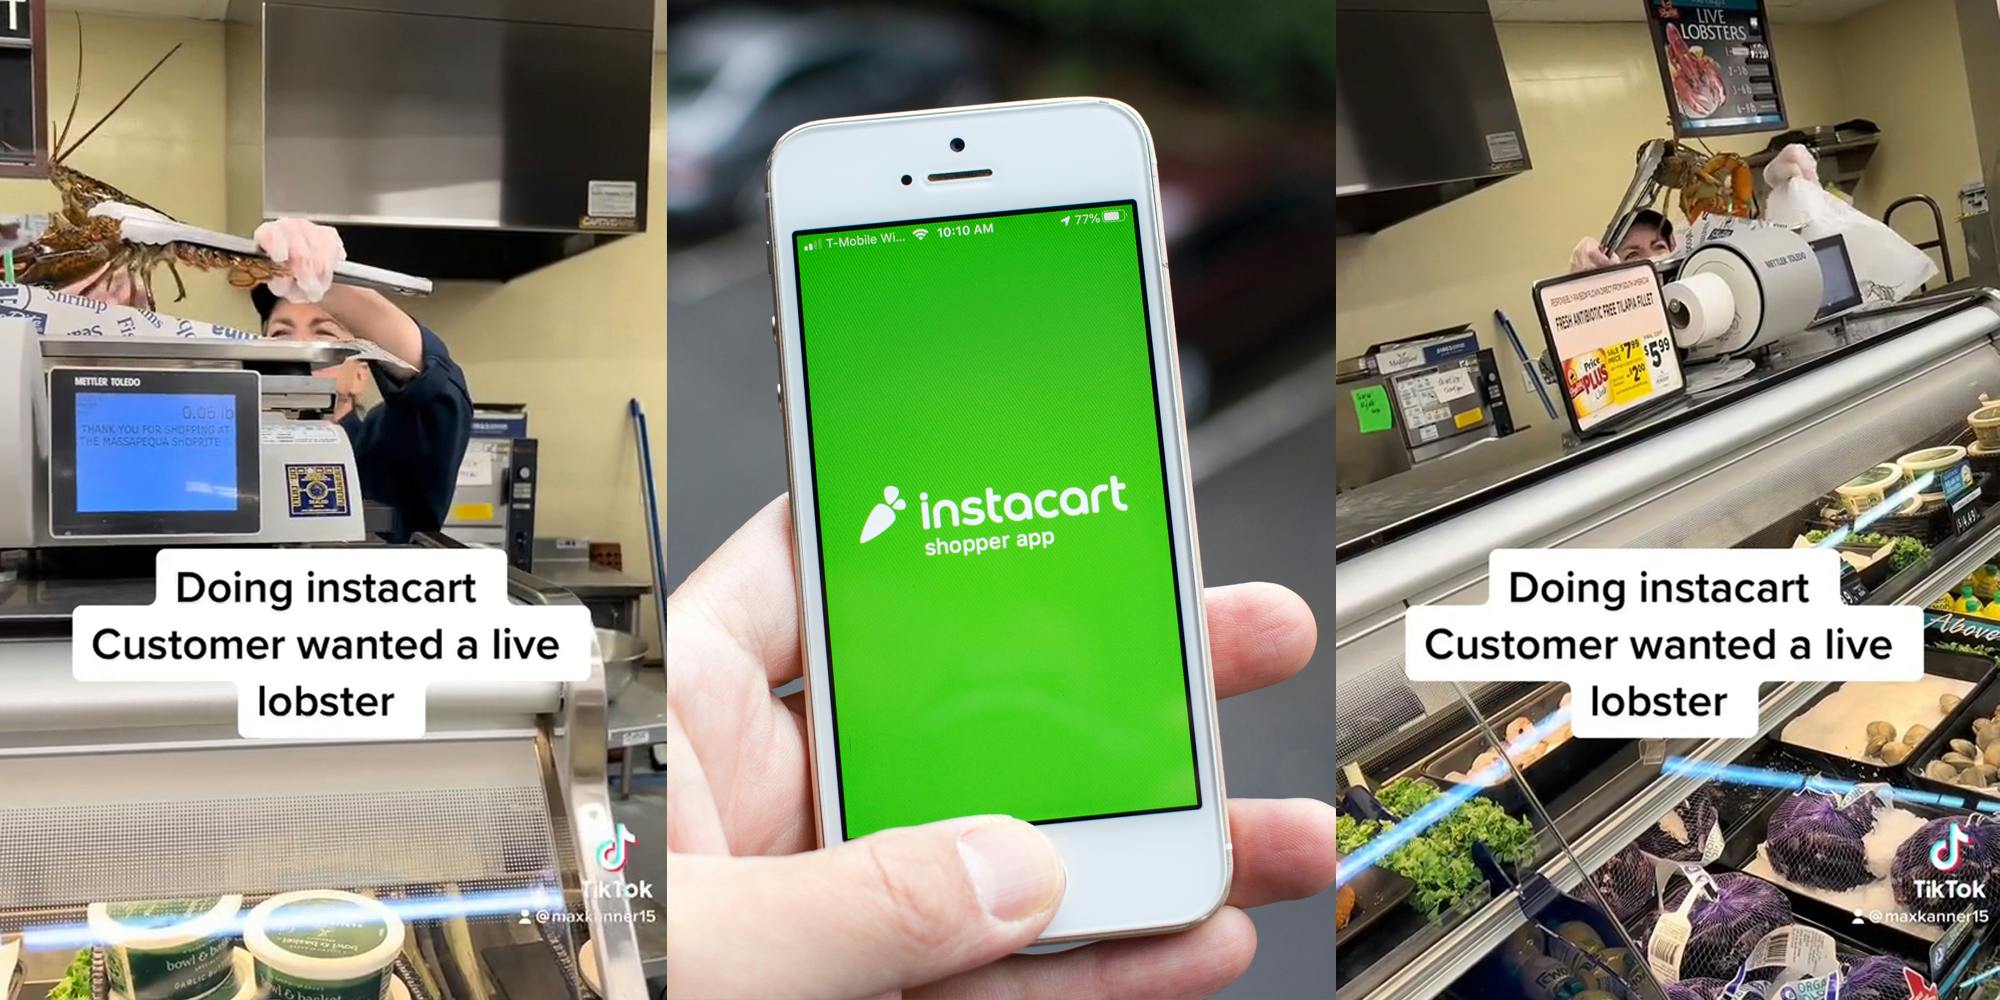 worker placing lobster on scale with caption "Doing instacart Customer wanted a live lobster" (l) hand holding phone with Instacart Shopper App on screen (c) worker placing lobster in grocery bag with caption "Doing instacart Customer wanted a live lobster" (r)